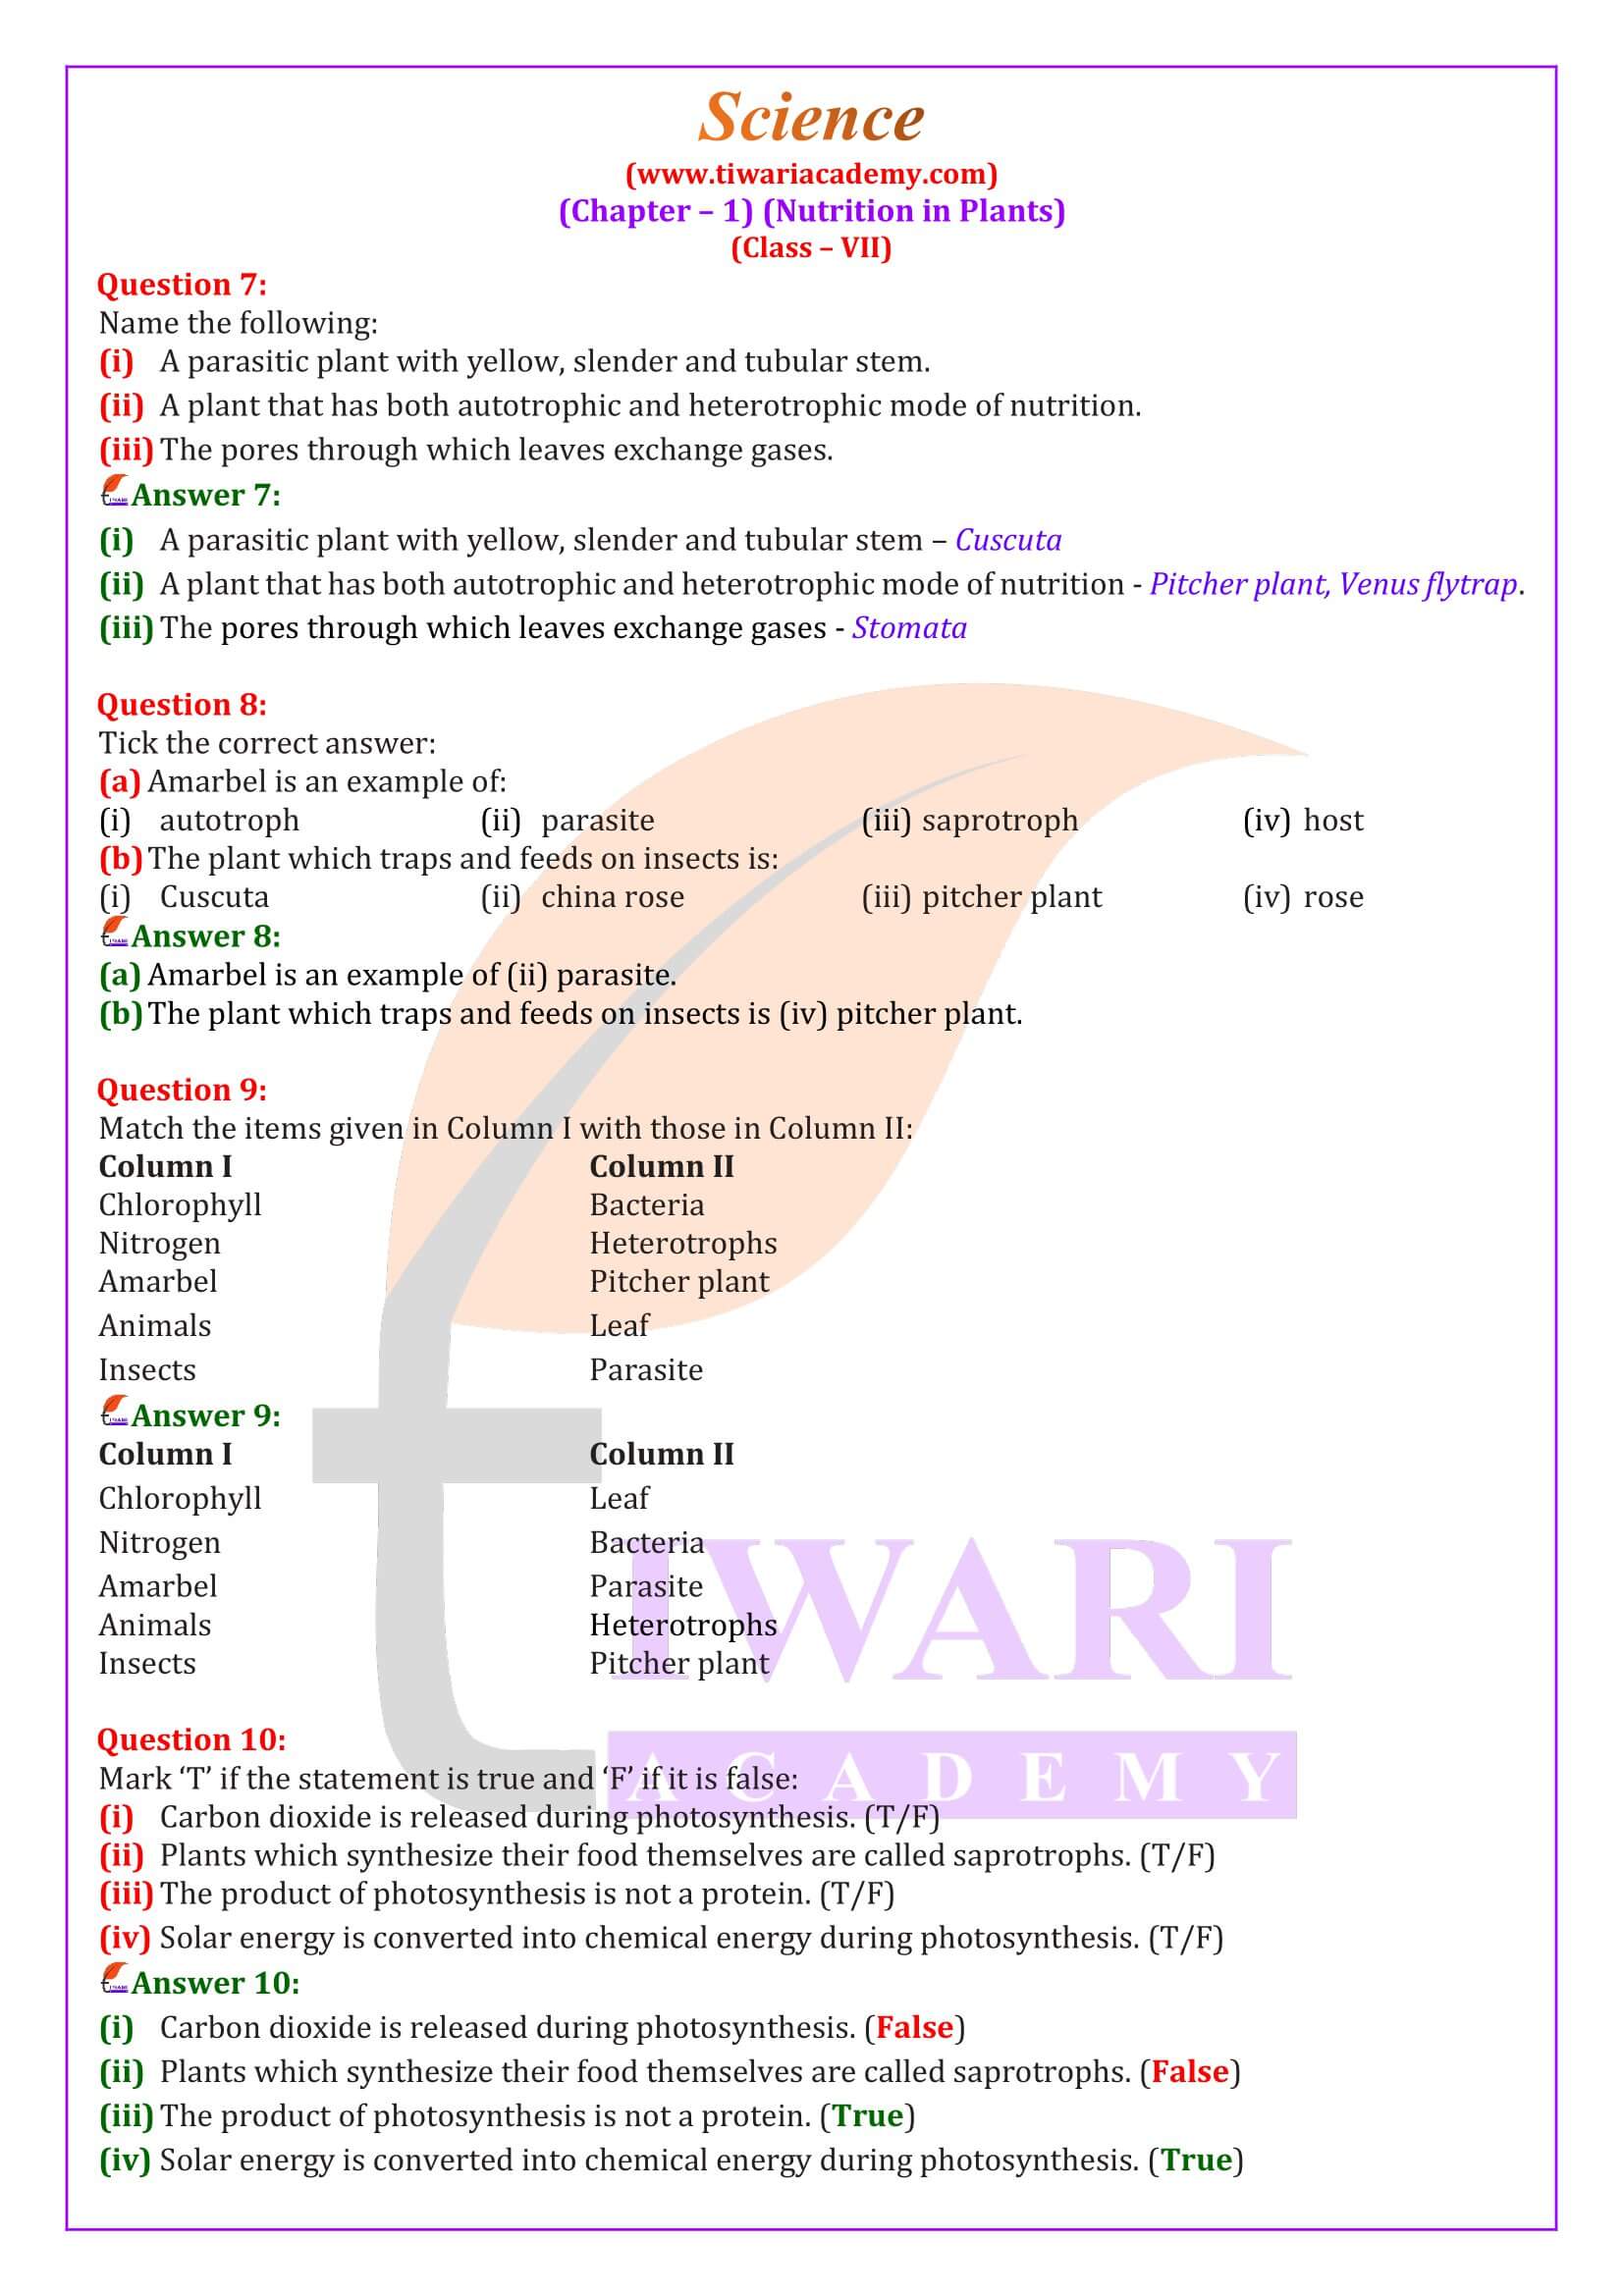 NCERT Solutions for Class 7 Science Chapter 1 in English Medium